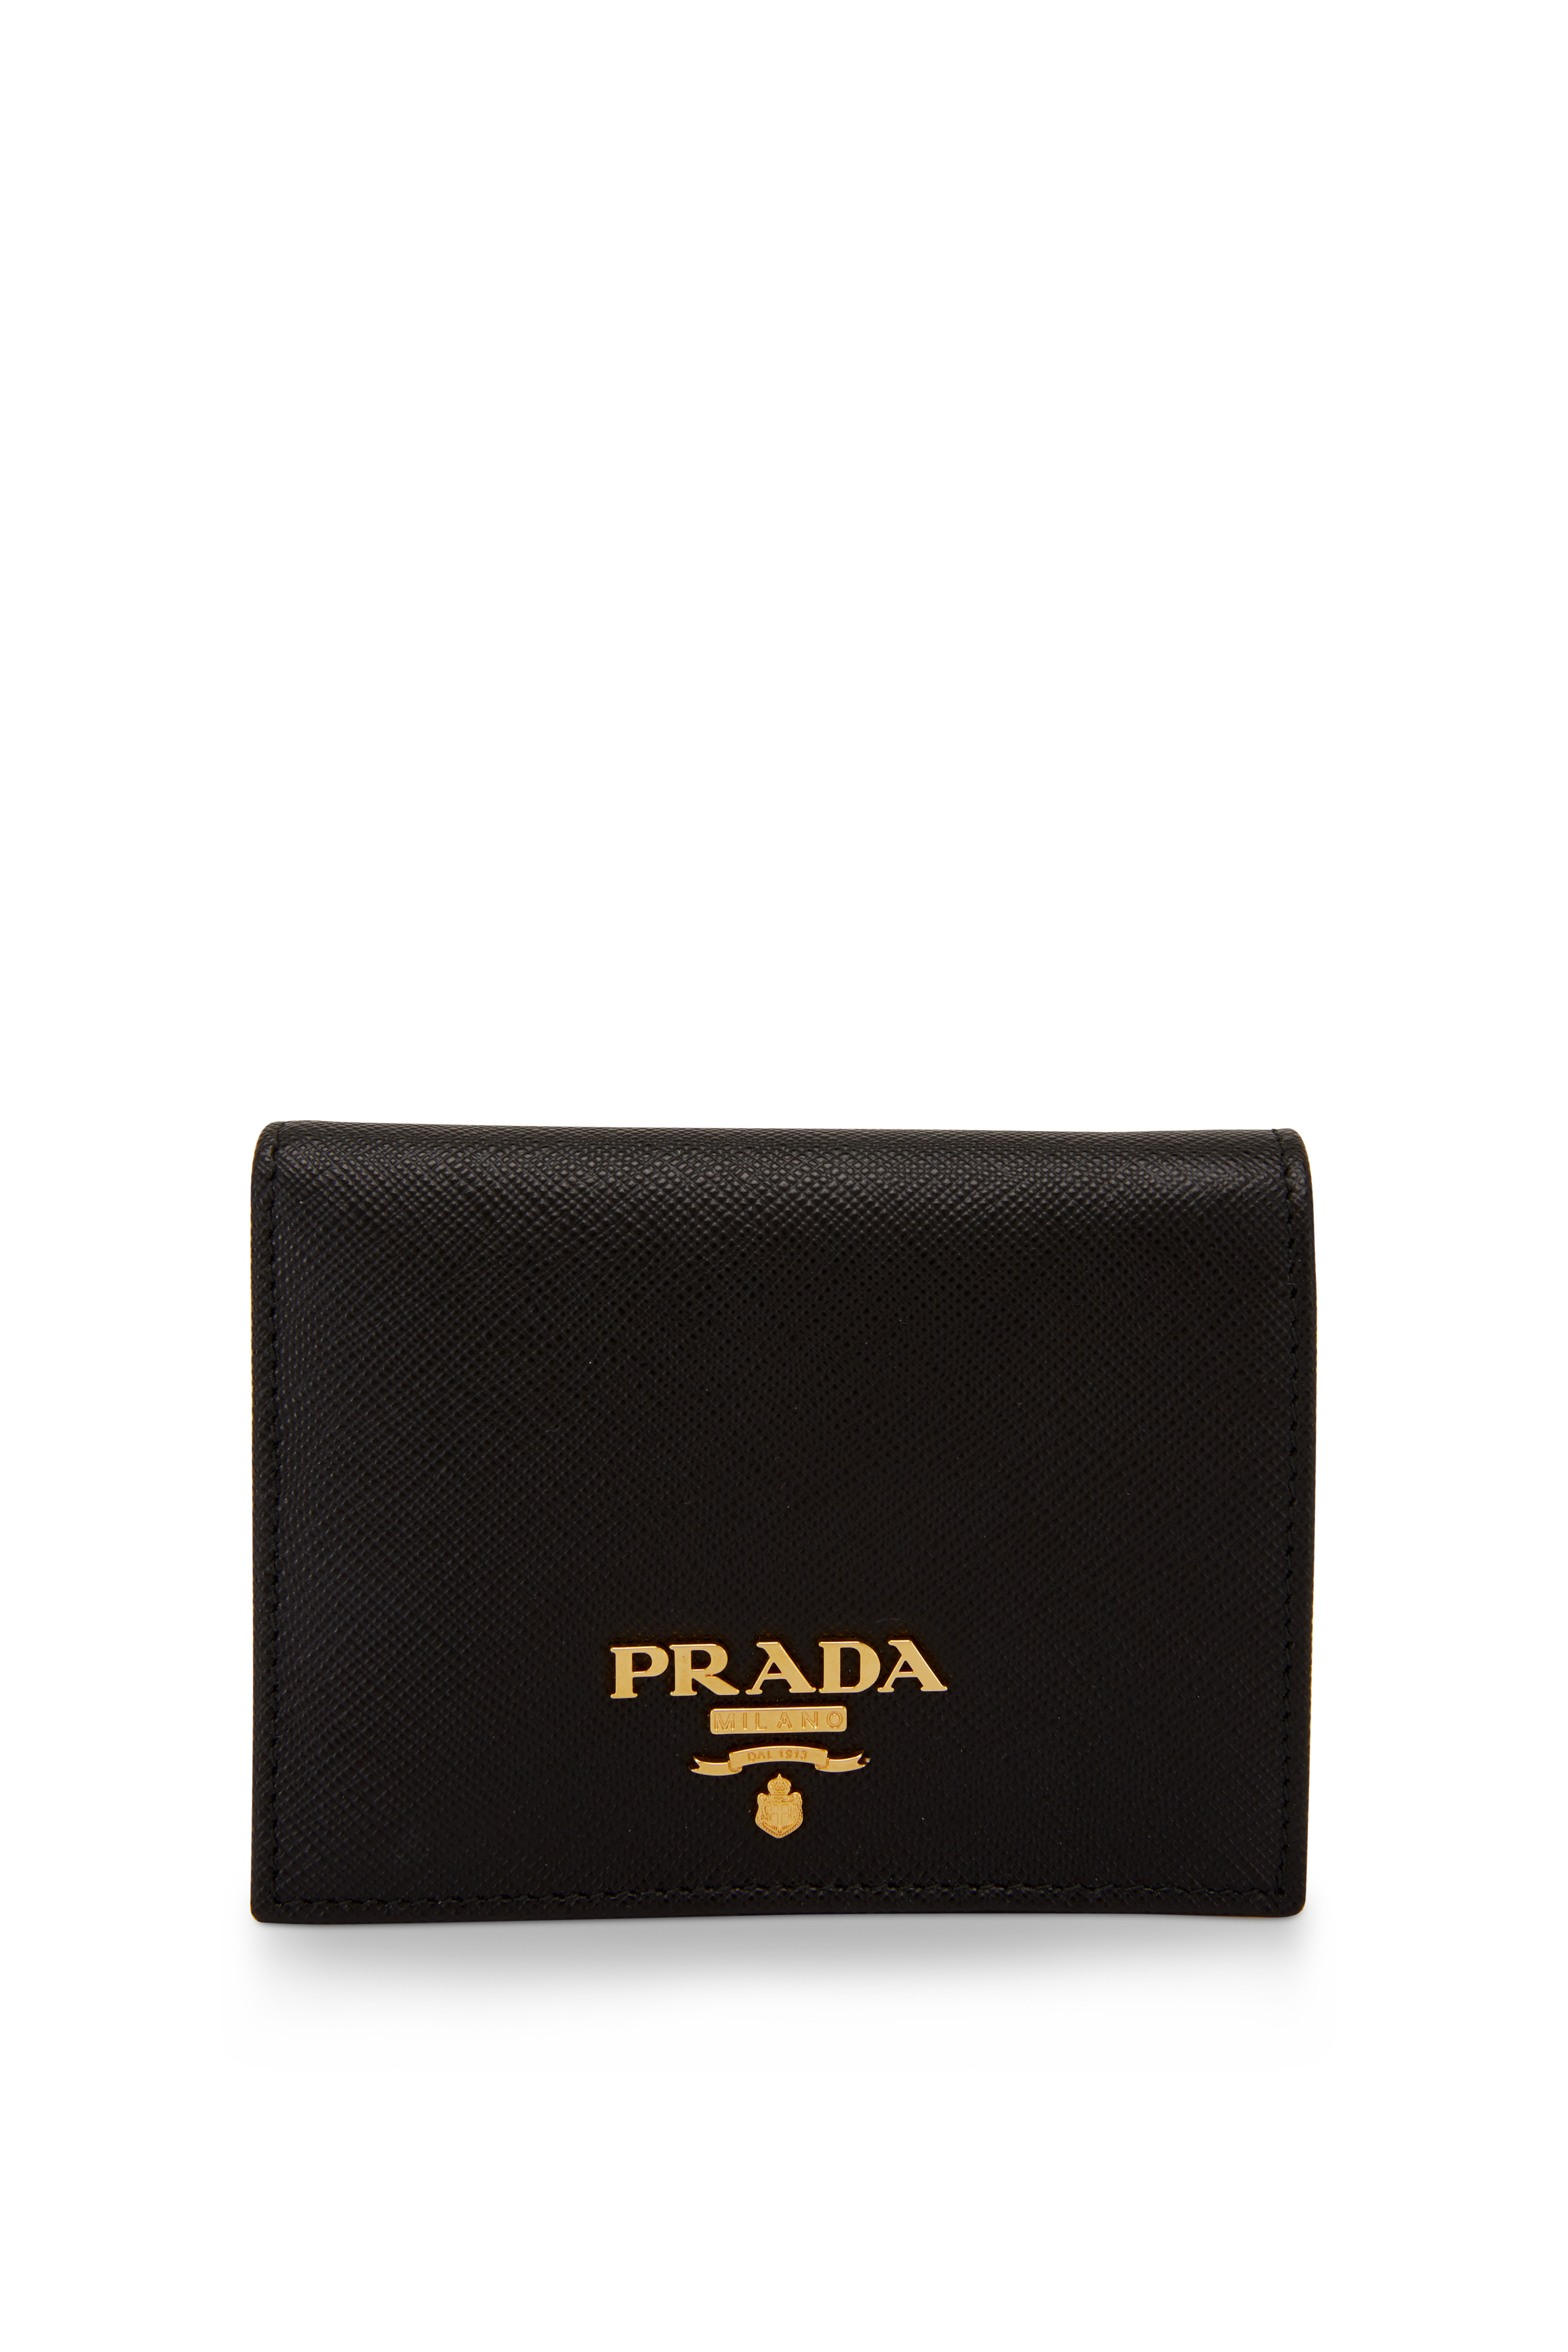 Prada - Black & Red Grained Leather Fold Over Wallet